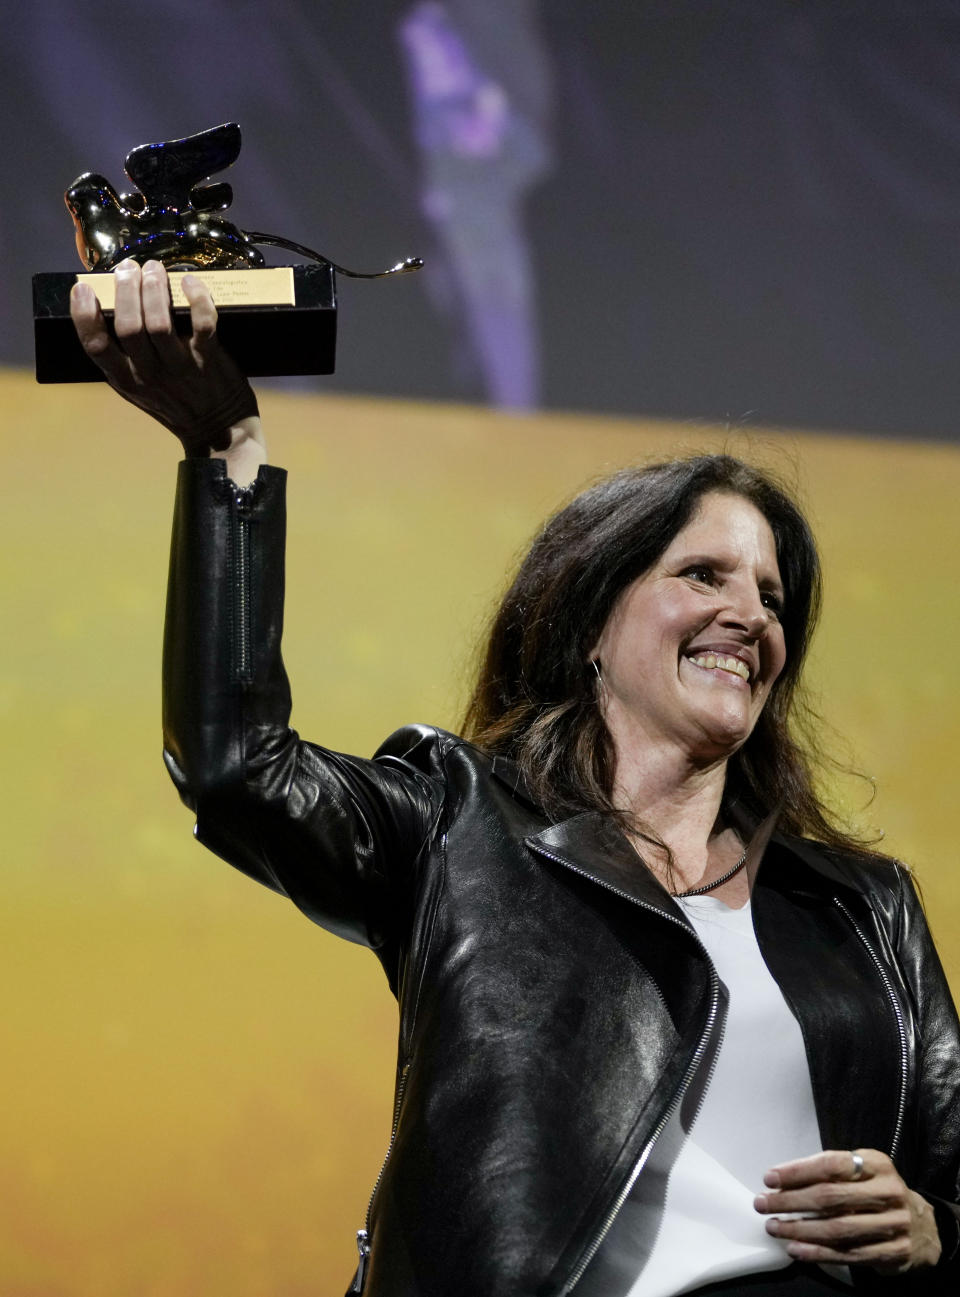 Director Laura Poitras holds the Golden Lion award for best film for 'All the Beauty and the Bloodshed' at the closing ceremony of the 79th edition of the Venice Film Festival in Venice, Italy, Saturday, Sept. 10, 2022. (AP Photo/Domenico Stinellis)